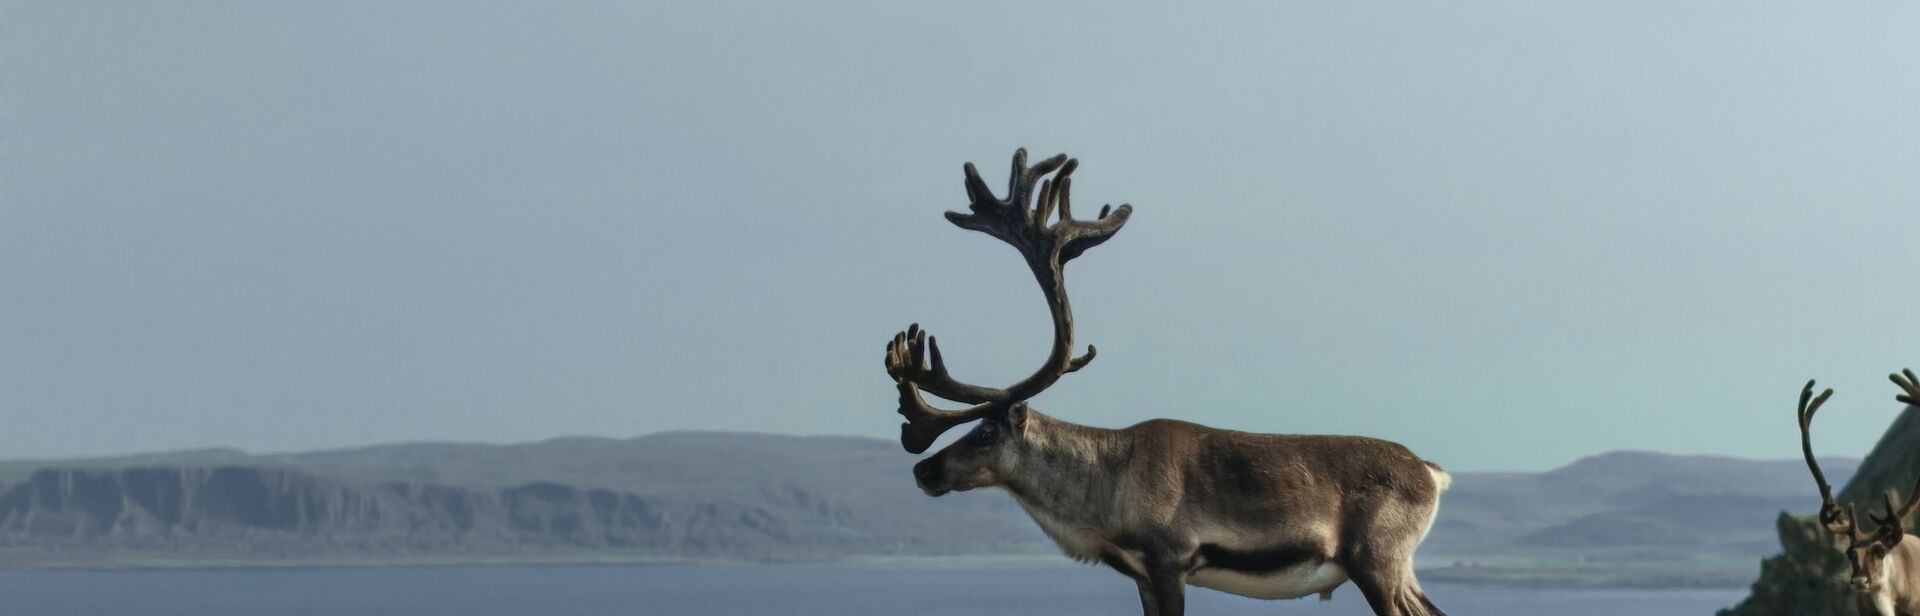 A reindeer stands on rocky ground near a body of water while another reindeer approaches on its right